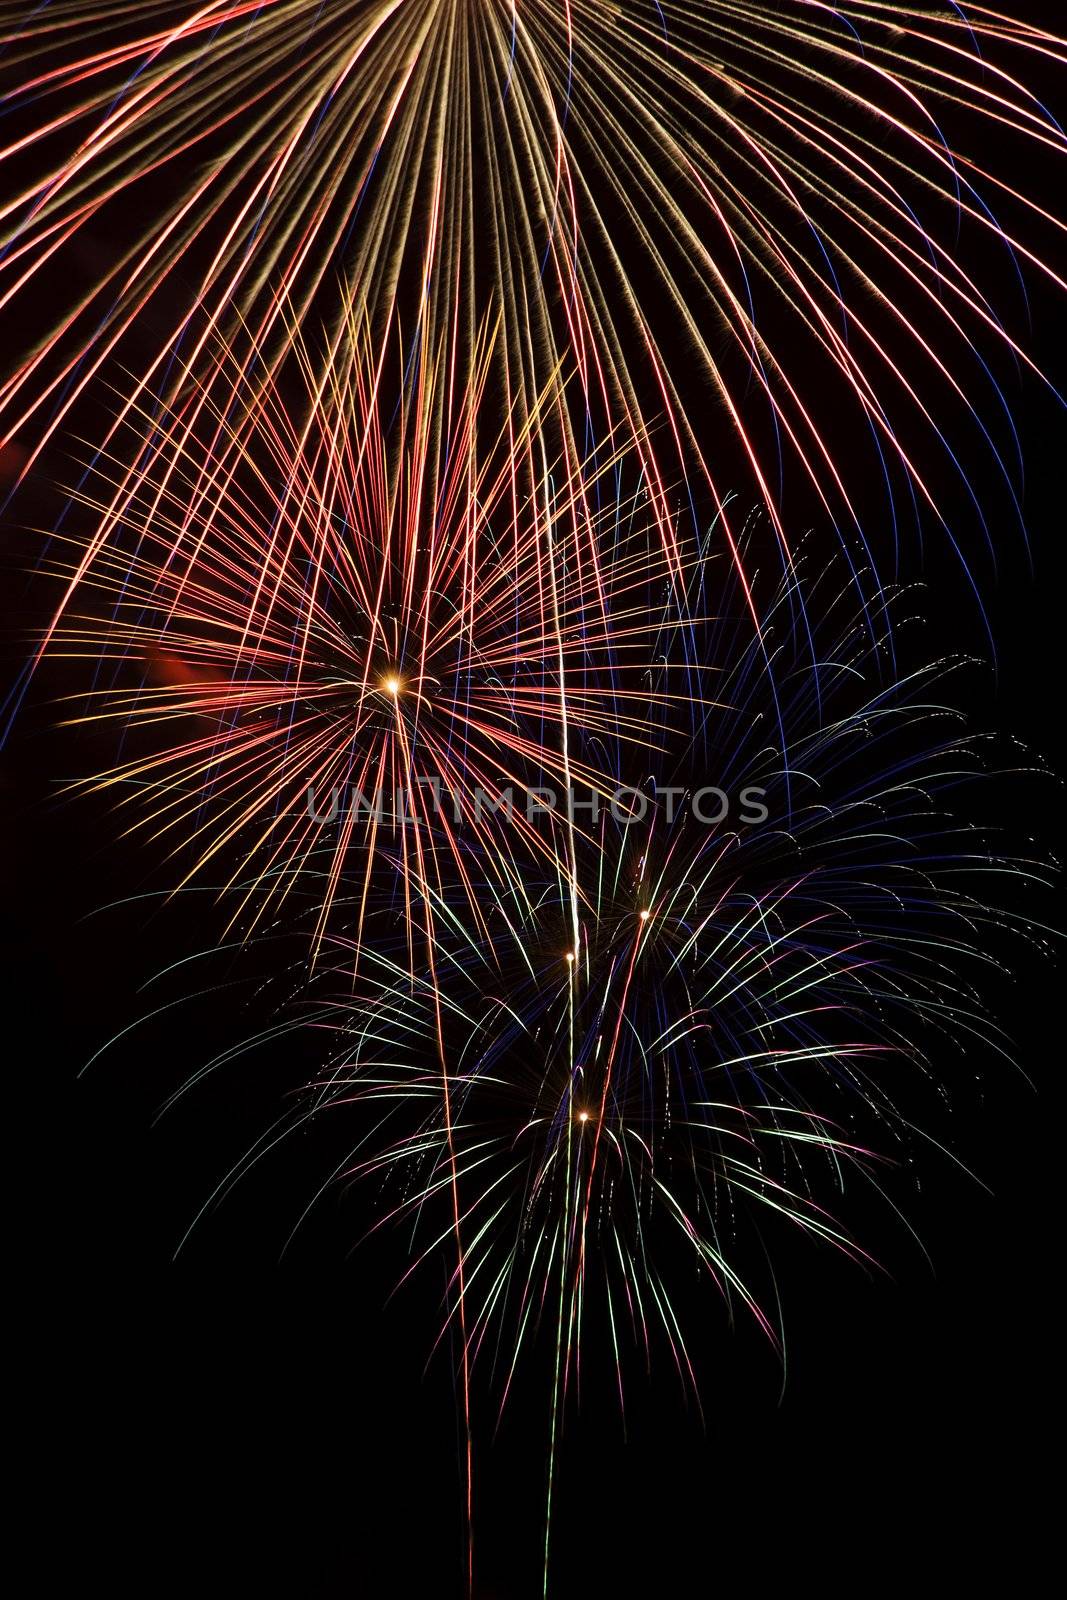 Long exposure closeup of a multiple fireworks explosions